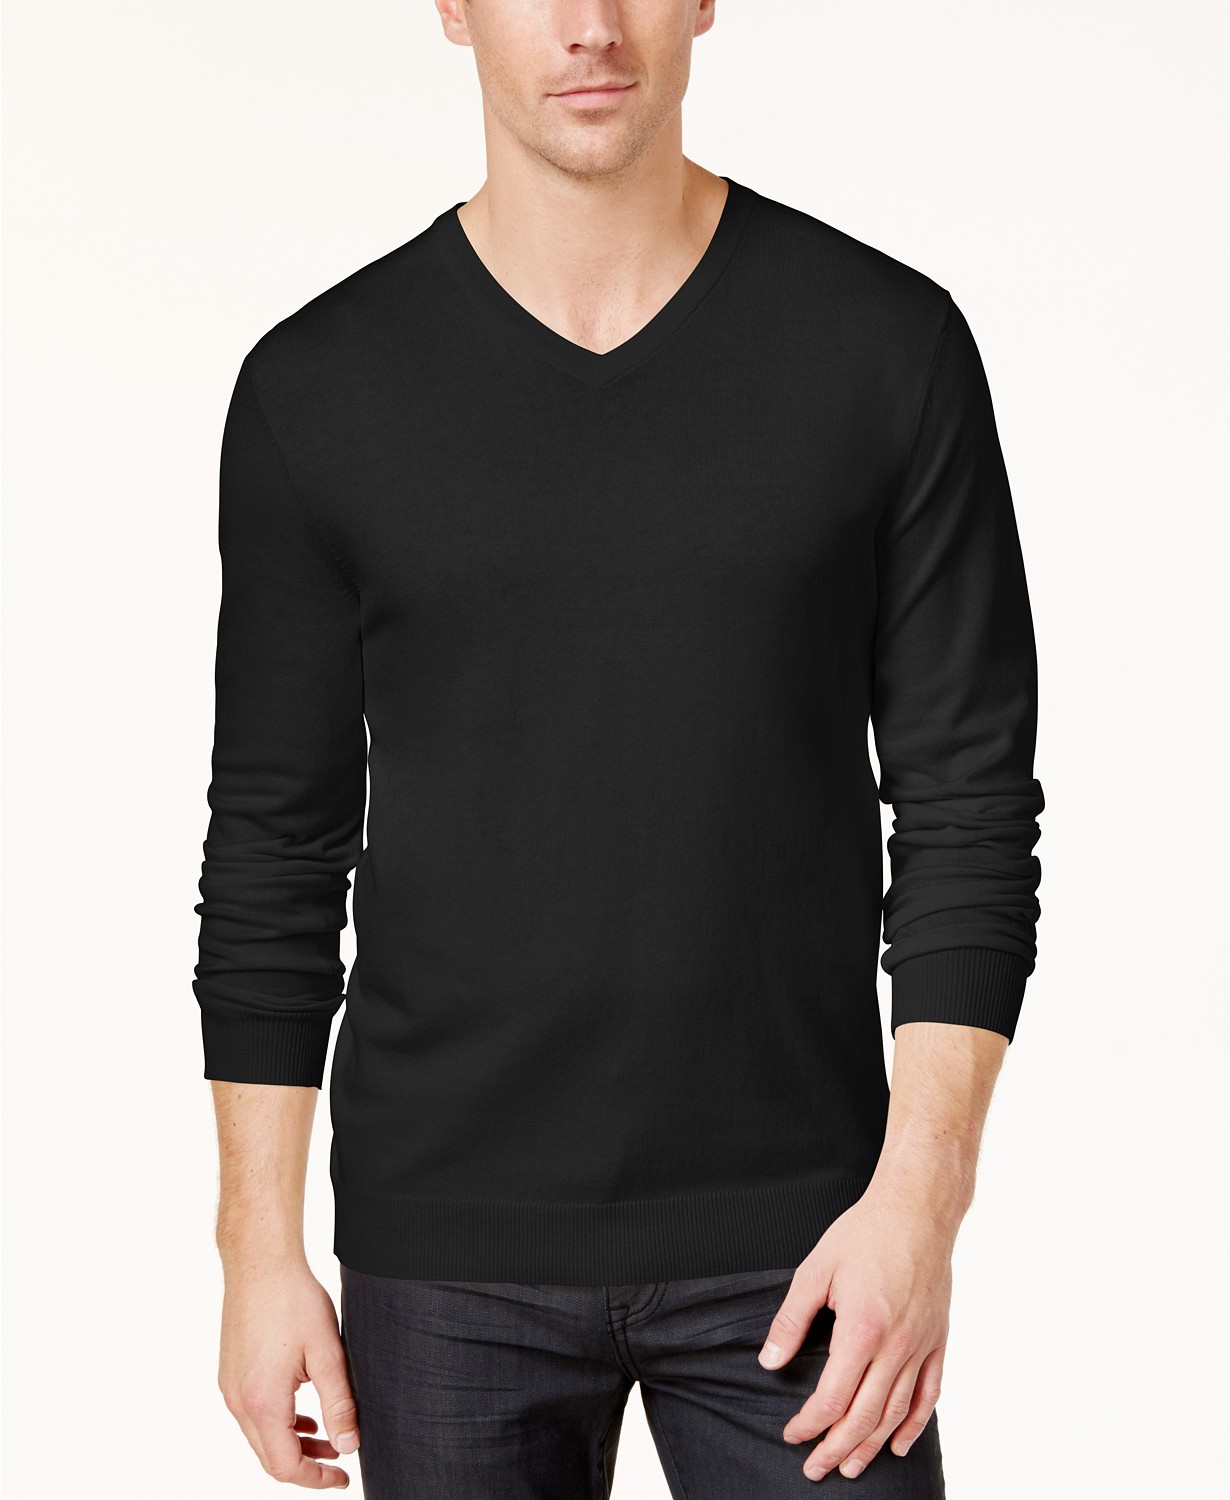 www.couturepoint.com-alfani-mens-black-solid-v-neck-long-sleeves-sweater